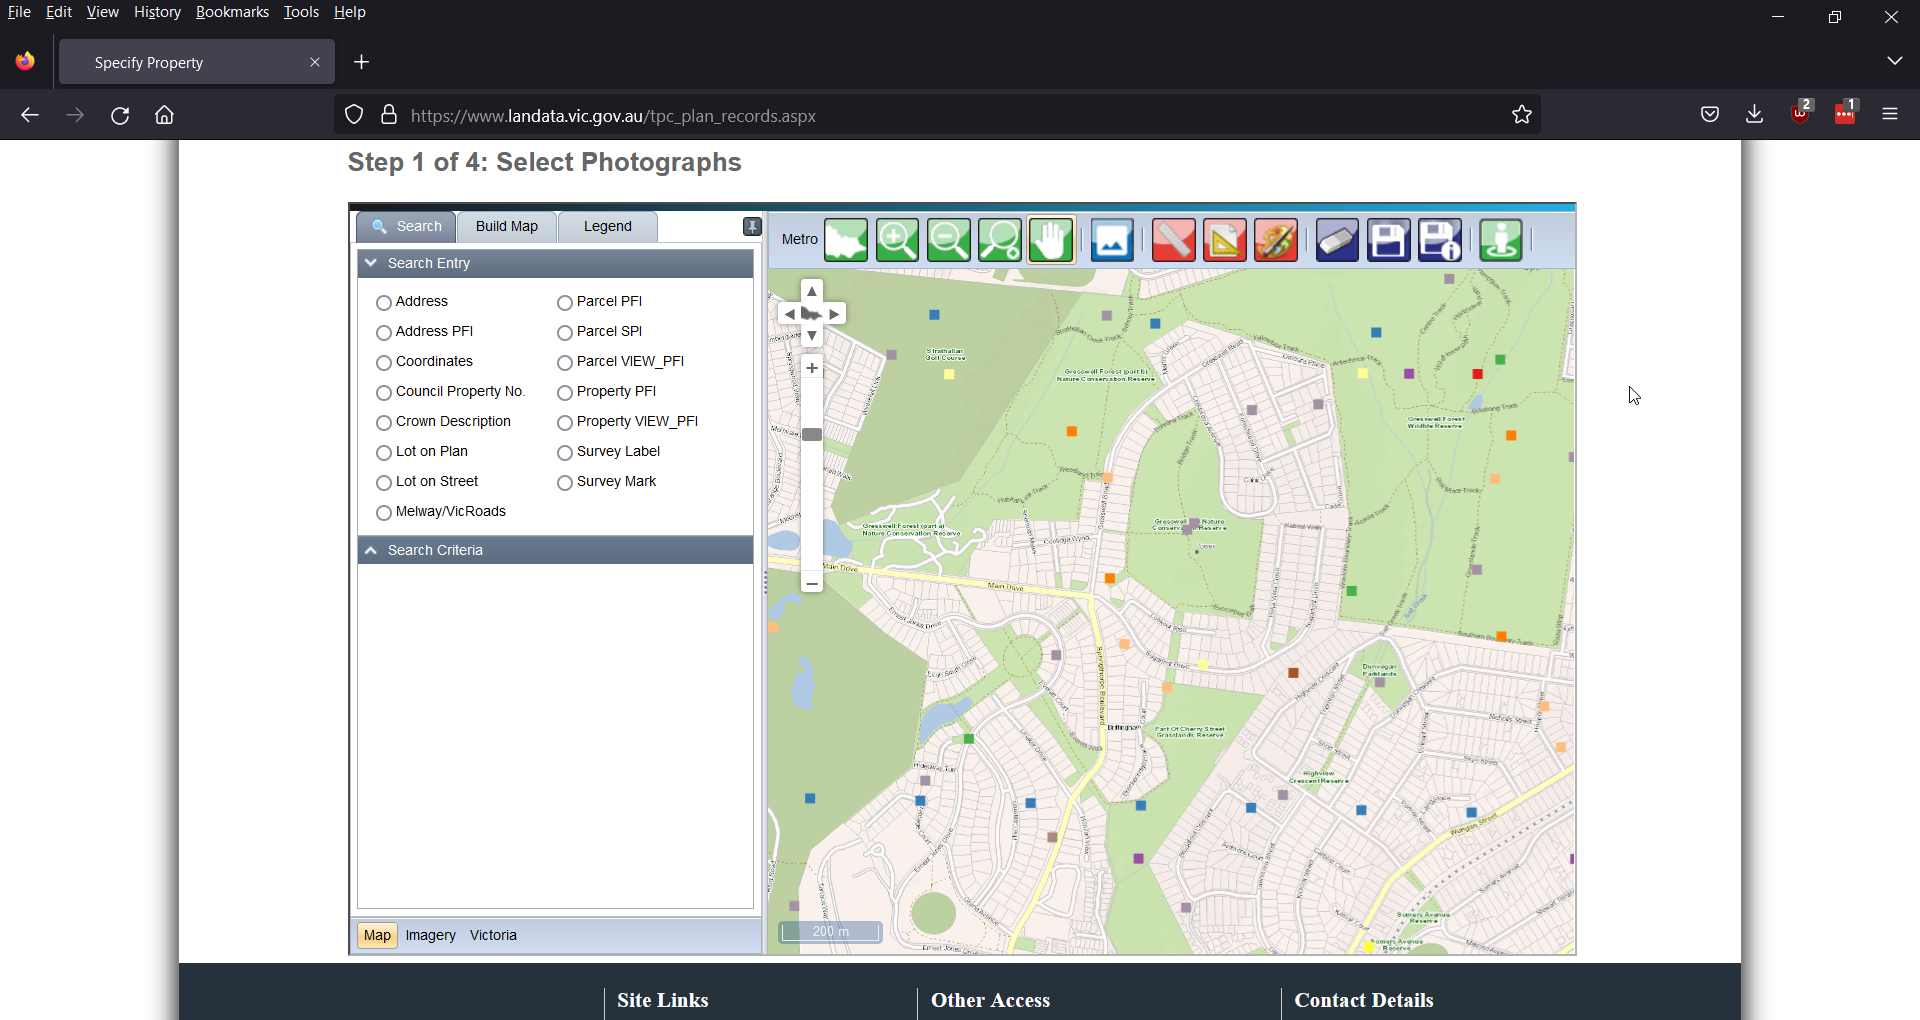 Screen capture of the LANDATA website showing how to select images from a map.